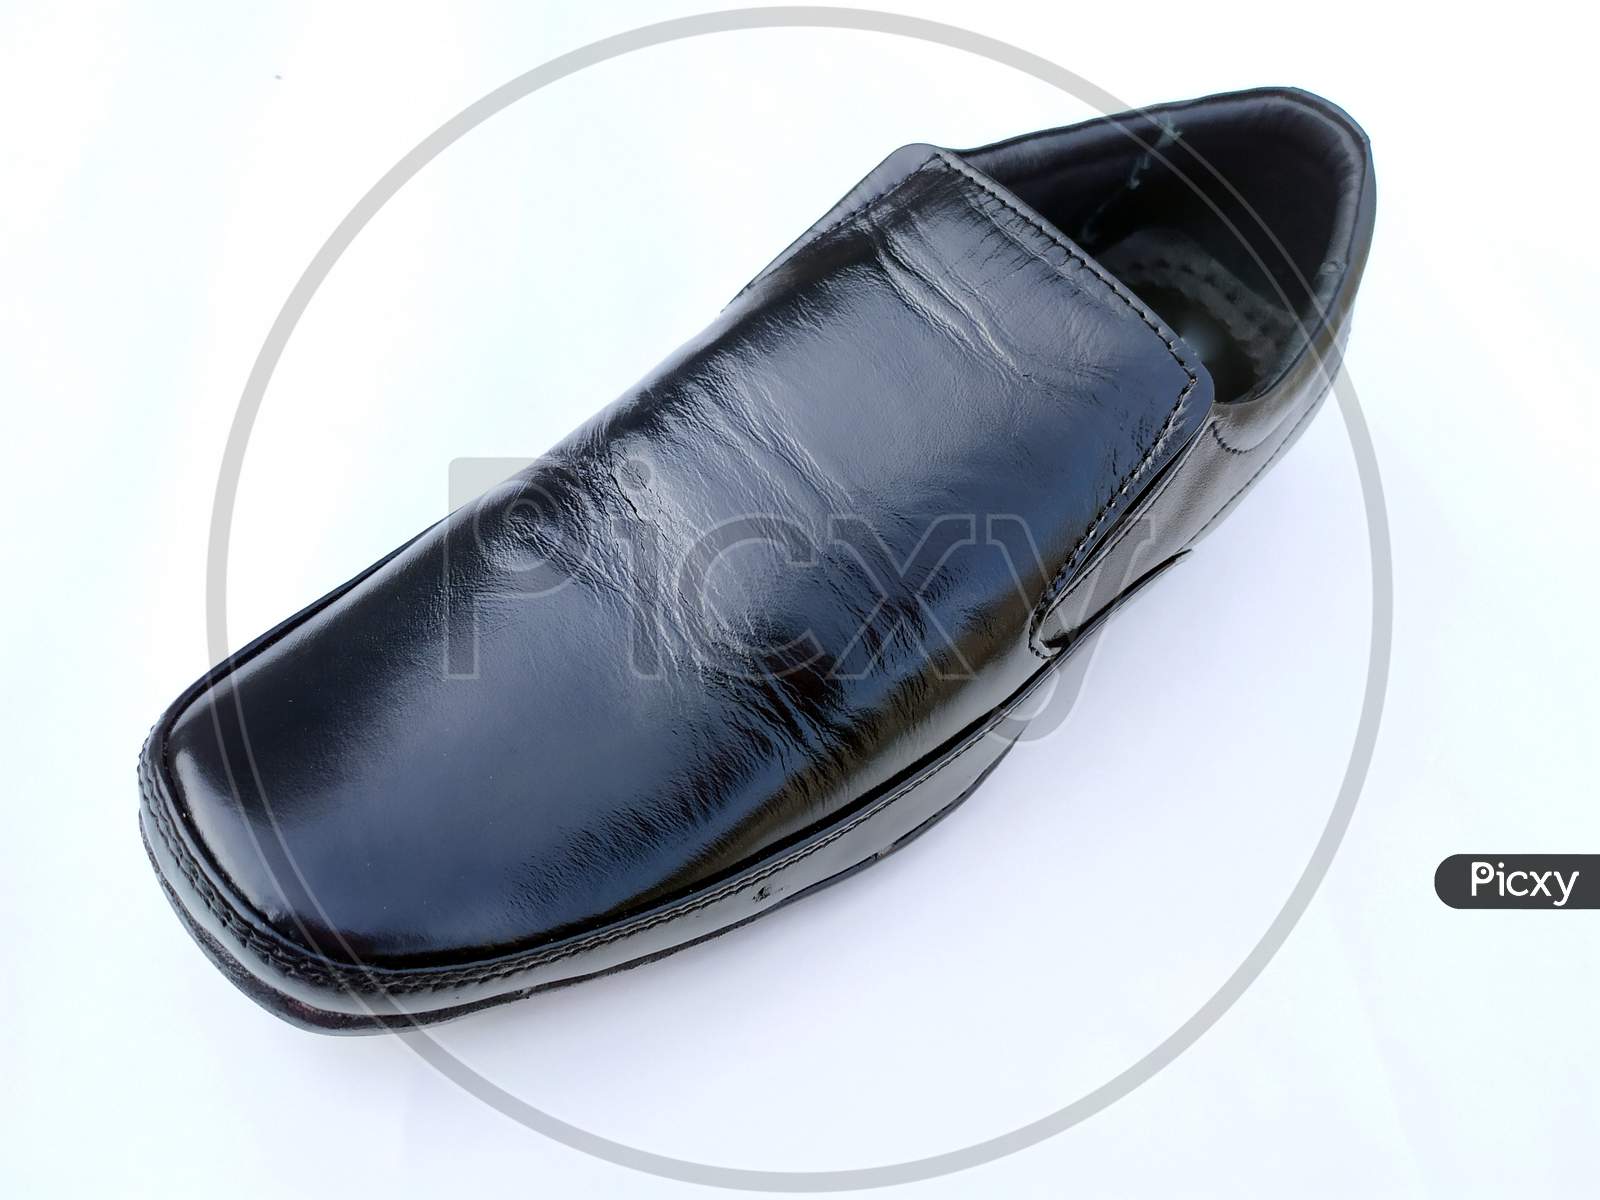 black mans leather shoes isolated on white background